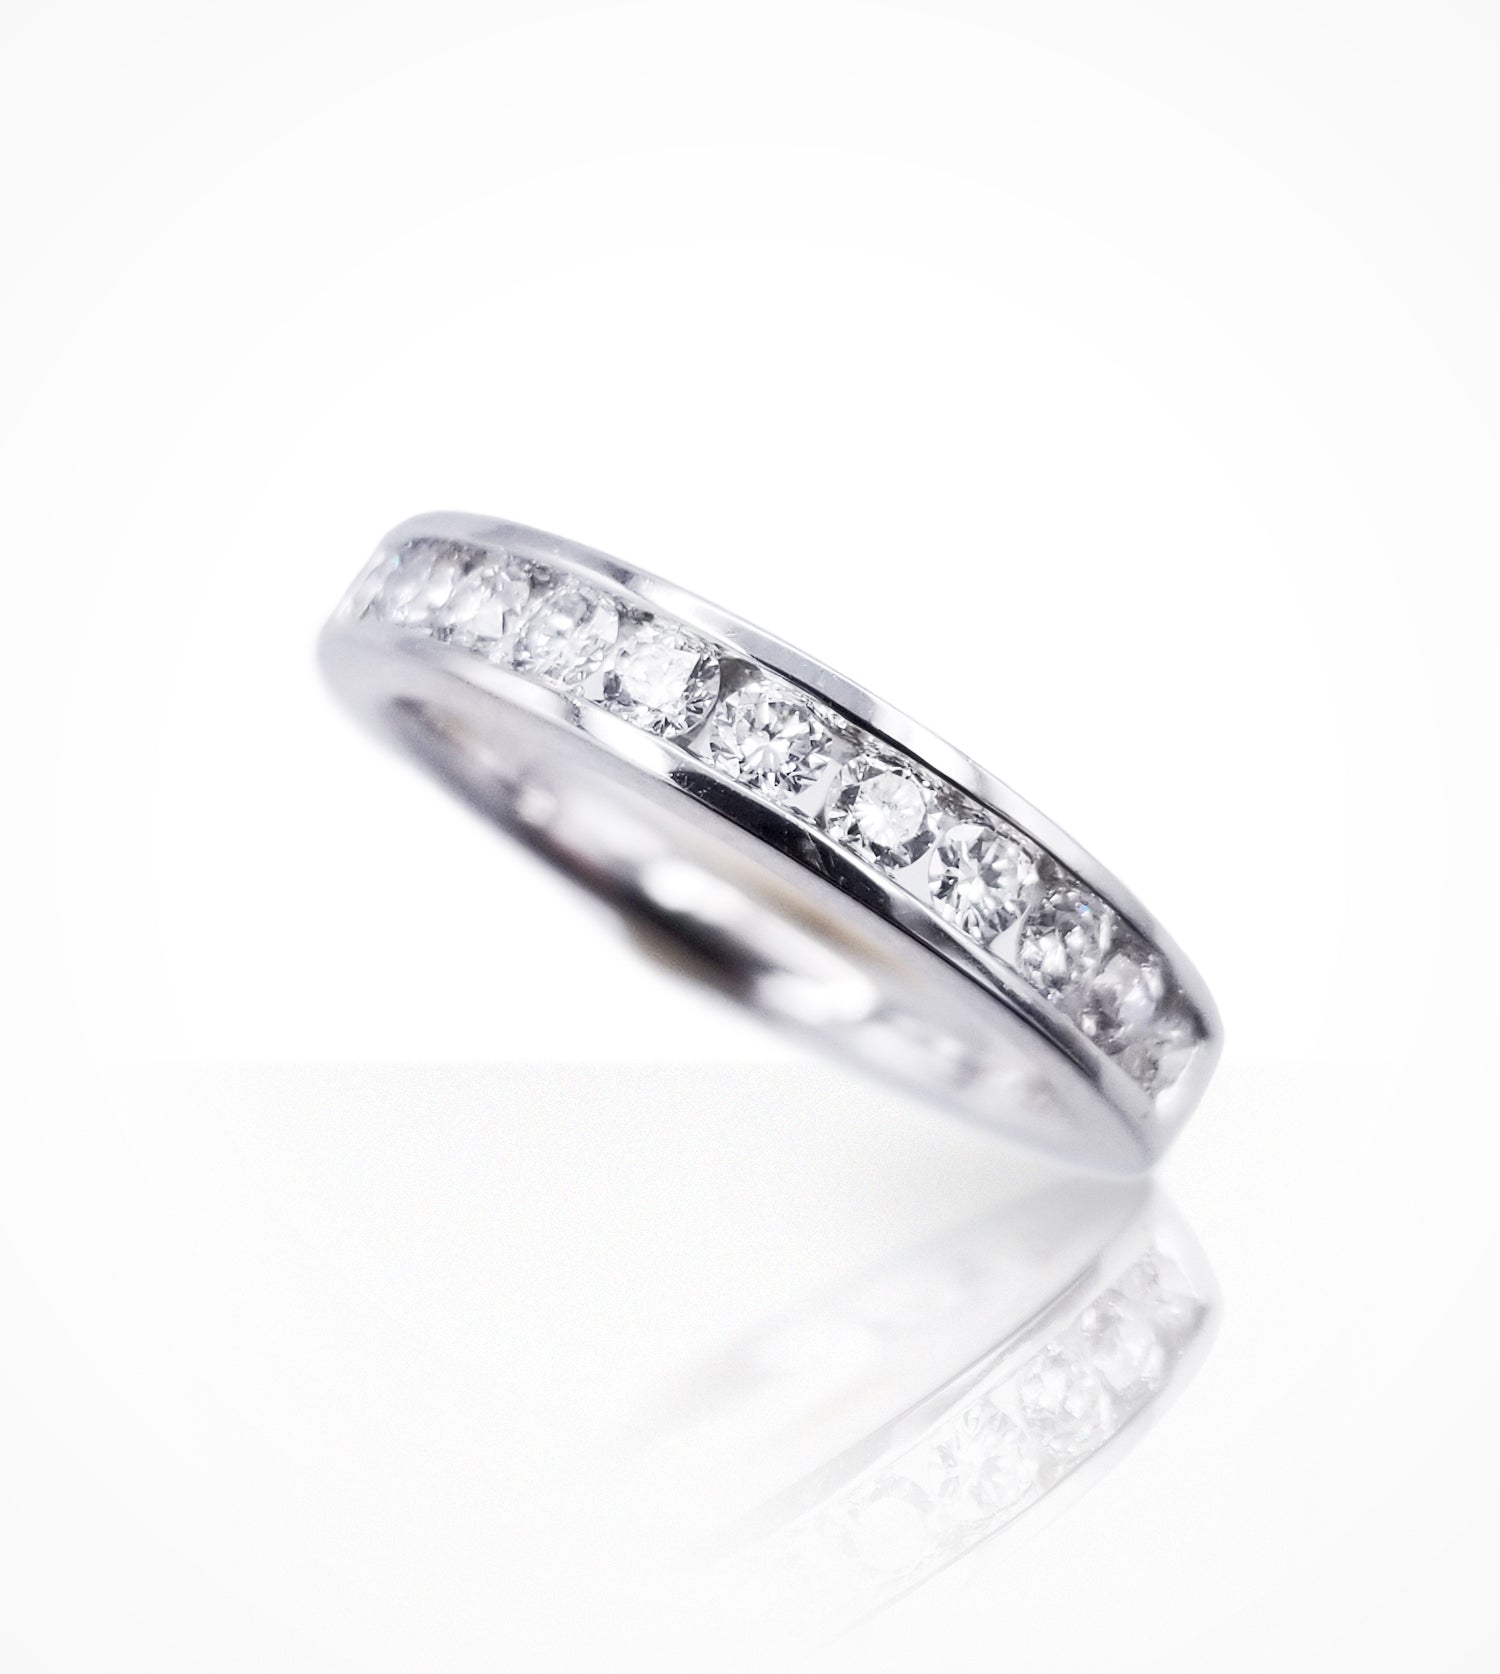 WB00024 18K white gold channel set diamond, half-eternity band,11 diamonds=0.50cts g, si. ready-to-wear jewellery at Secrett.ca in Toronto Downtown Yorkville